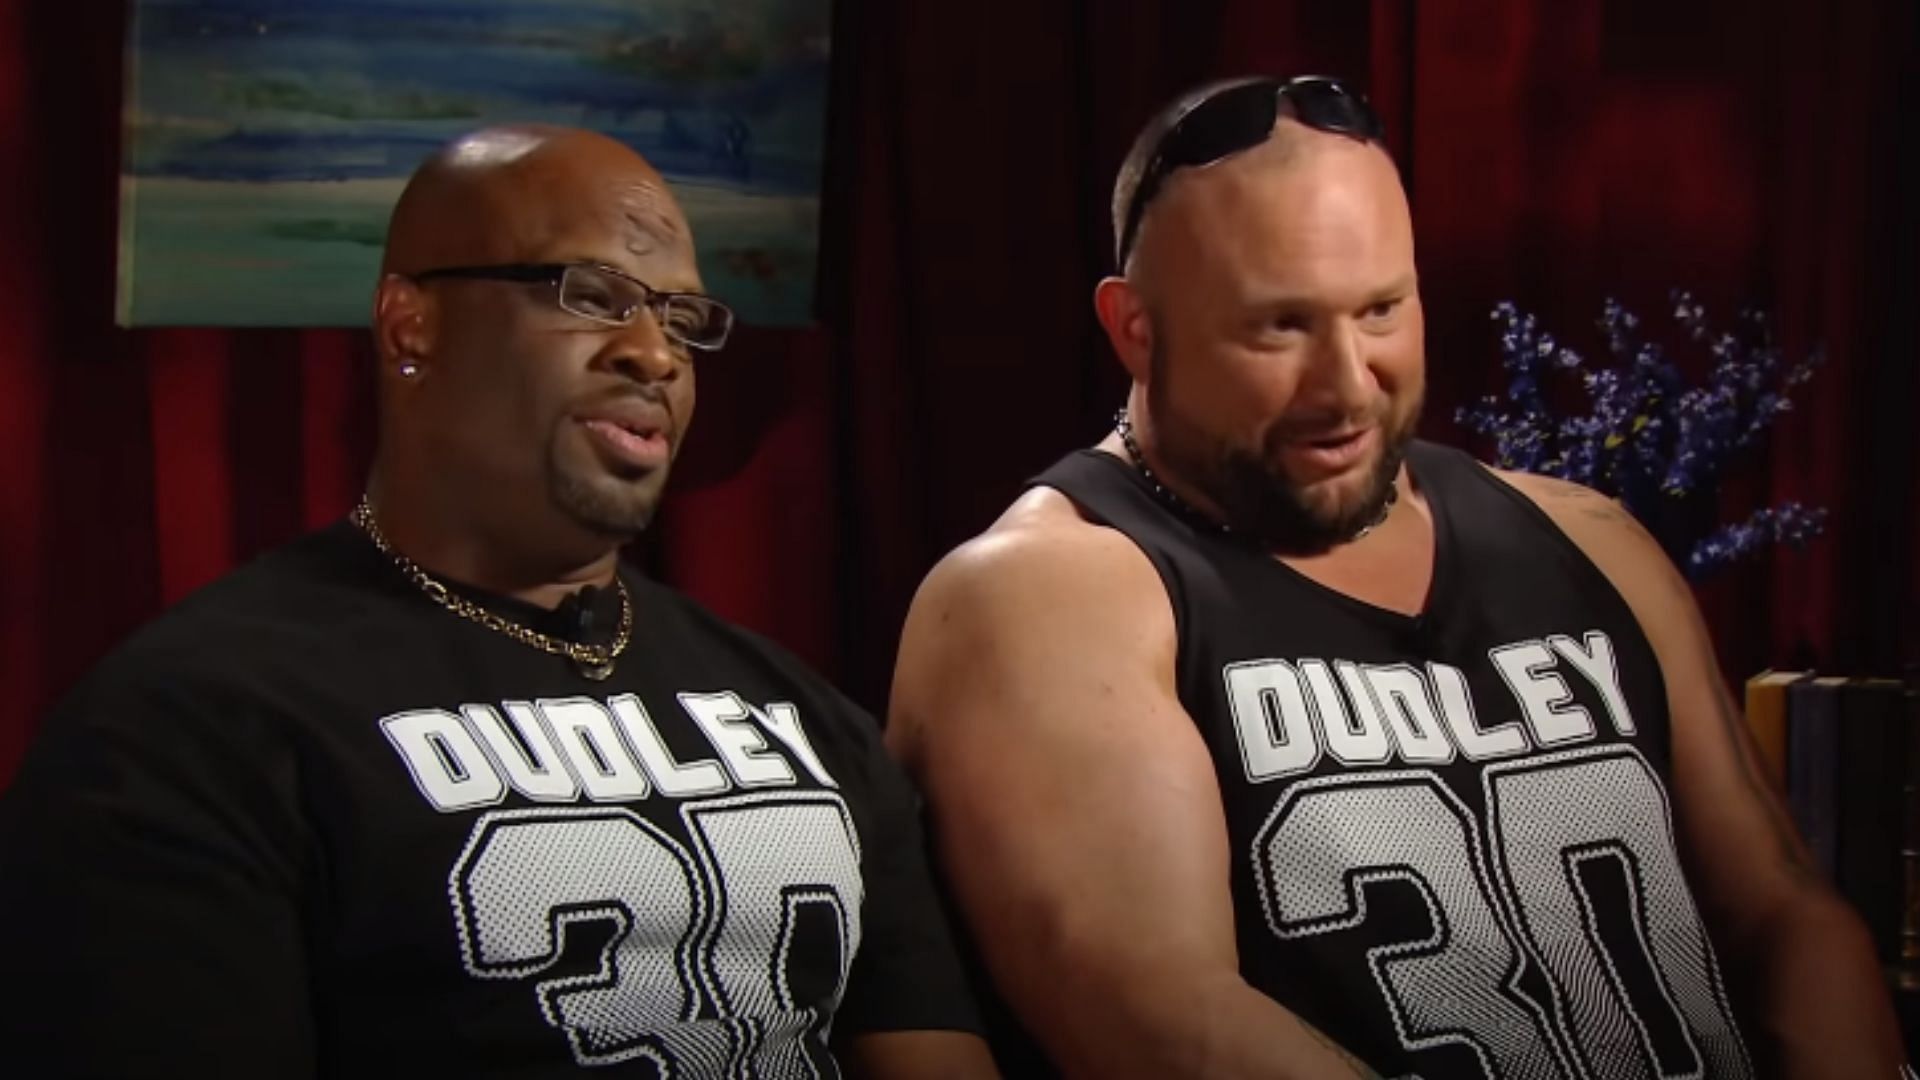 D-Von Dudley (left) and Bubba Ray Dudley (right)